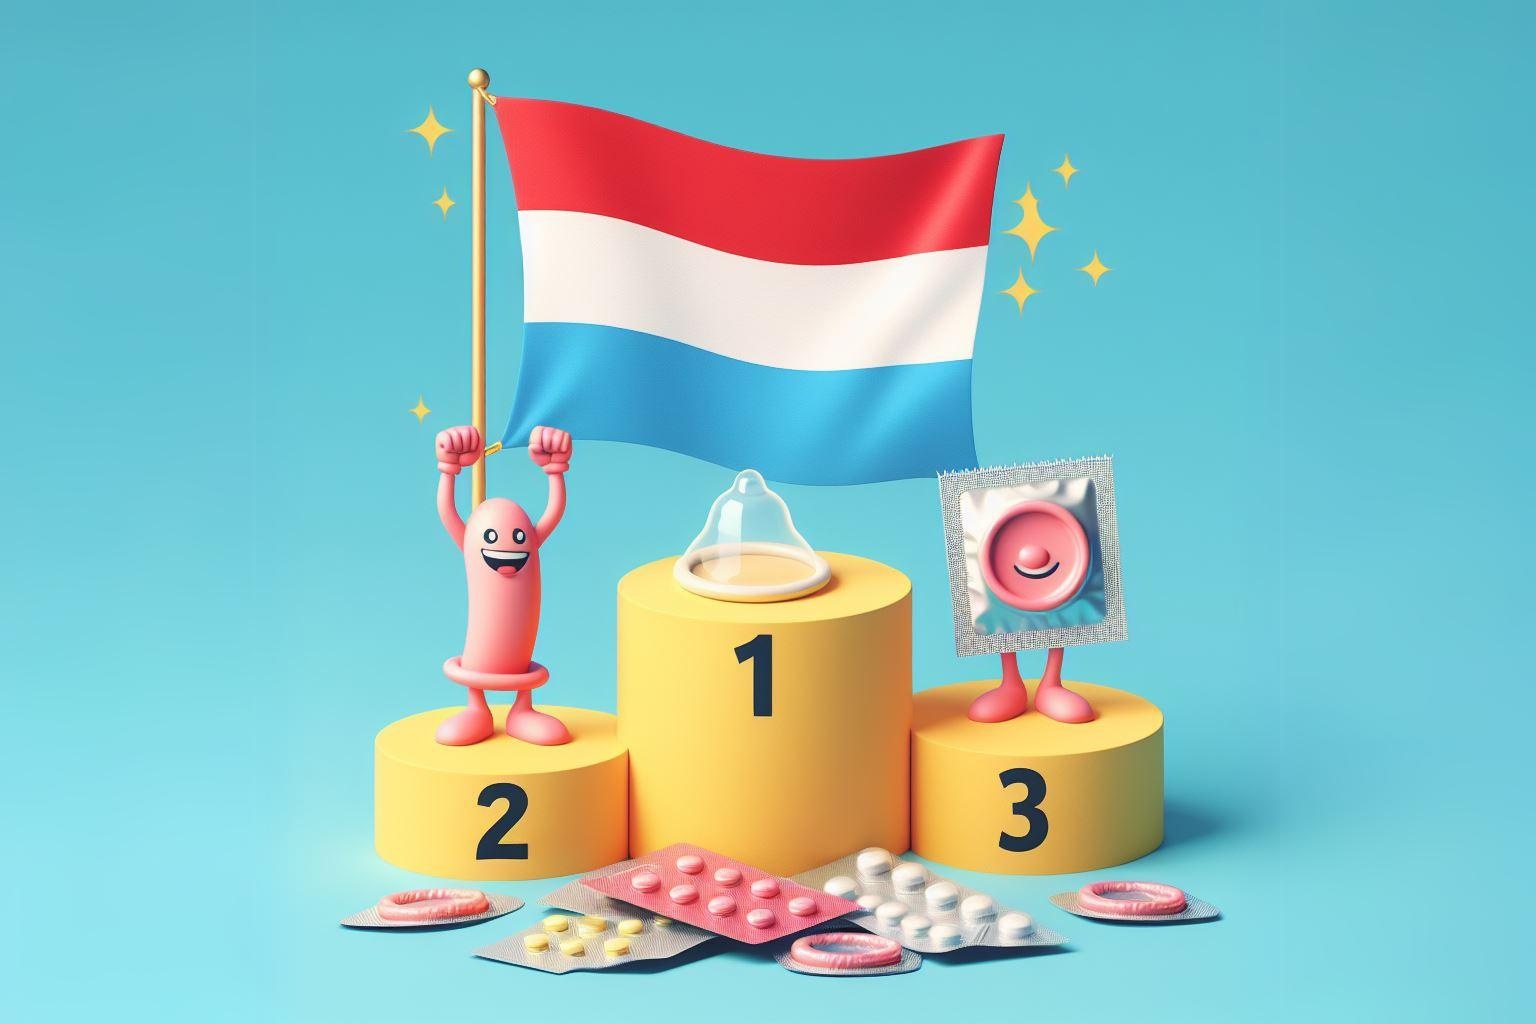 Luxembourg flag as number 1 on a winner's podium on the topic of contraception